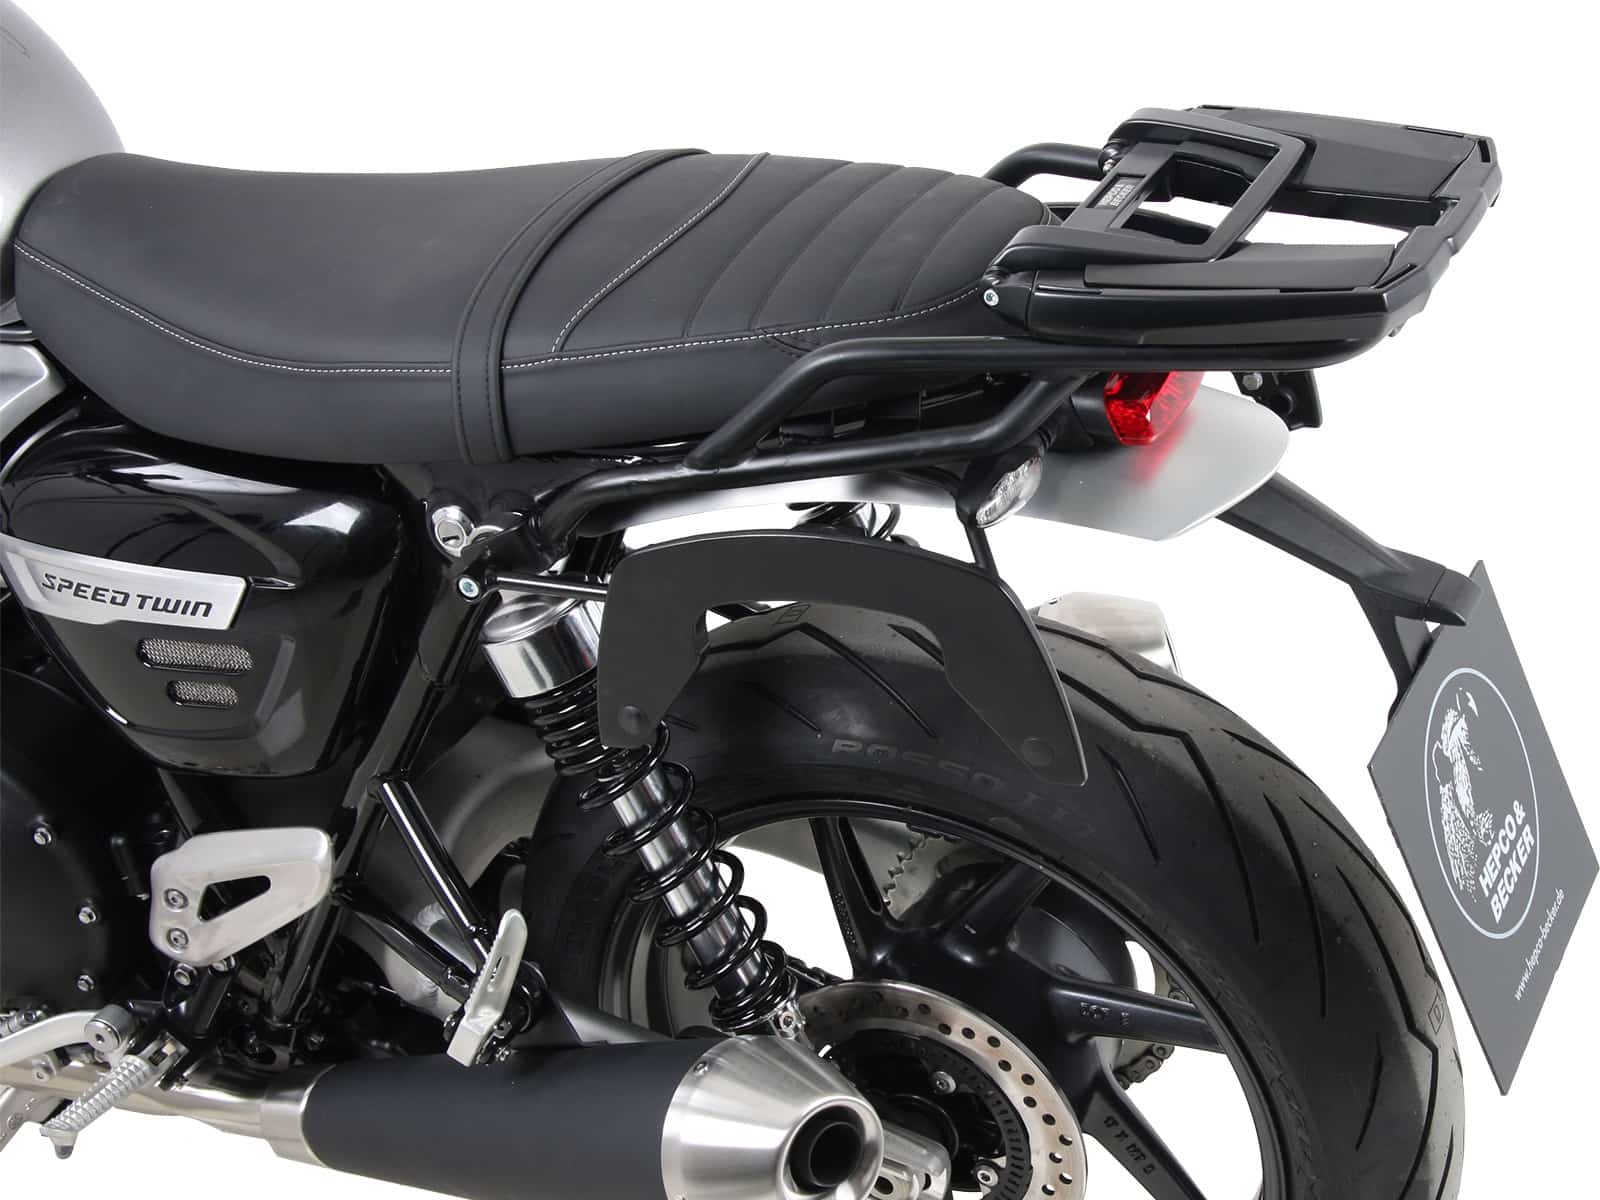 Becker Triumph Speed Twin Easyrack Top Box Carrier Black BY HEPCO & BECKER 4042545671372 From 2019 